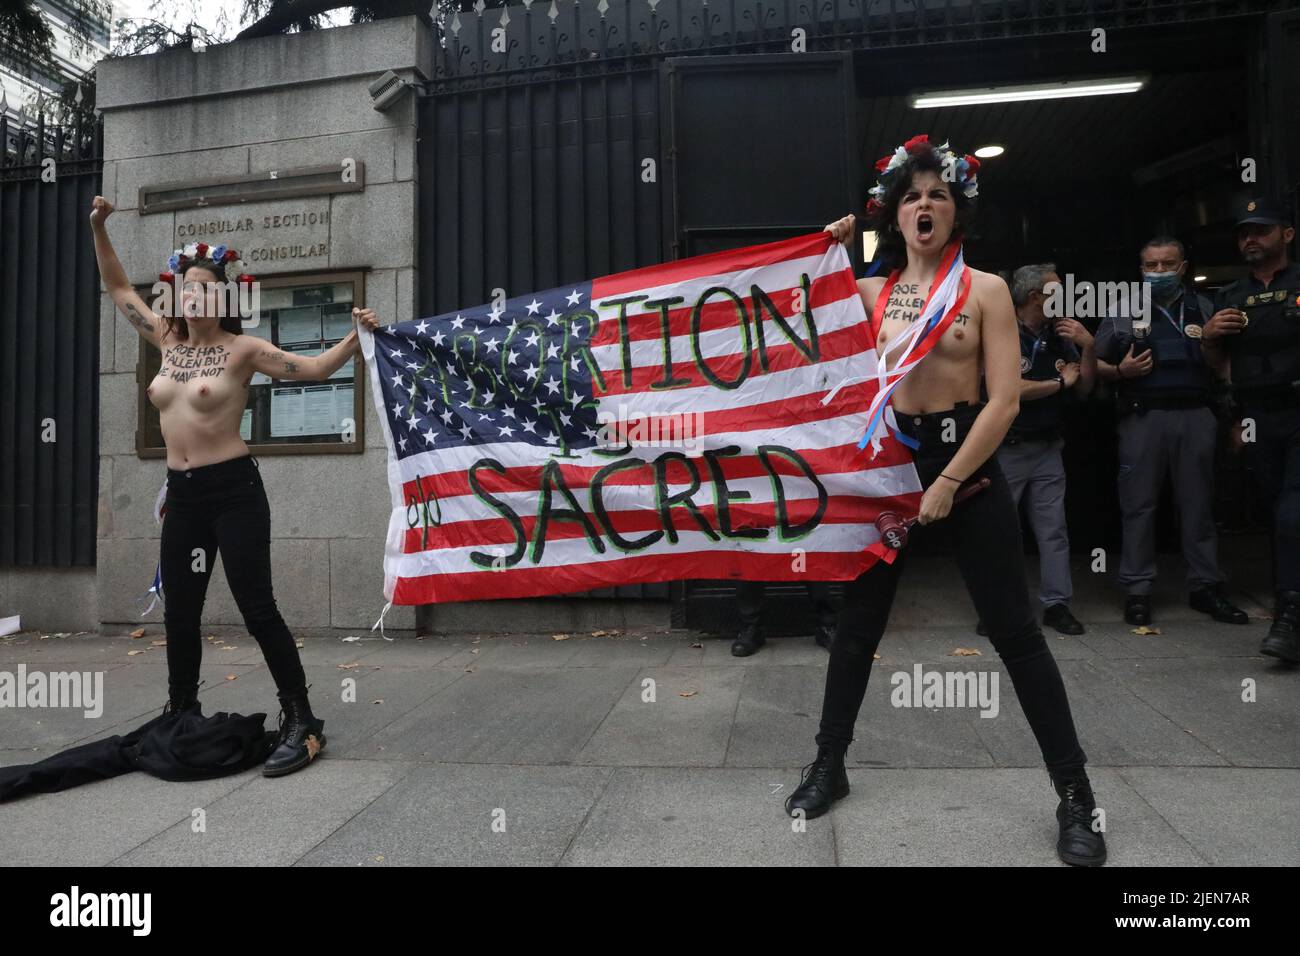 Madrid, Spain. 27th June, 2022. Members of the women's activist group Femen protest with a banner that reads 'abortion is sacred' in front of the U.S. embassy in Madrid, Spain, on June 27, 2022, following the US Supreme Court decision to end the constitutional right to abortion. Credit: Isabel Infantes/Alamy Live News Stock Photo